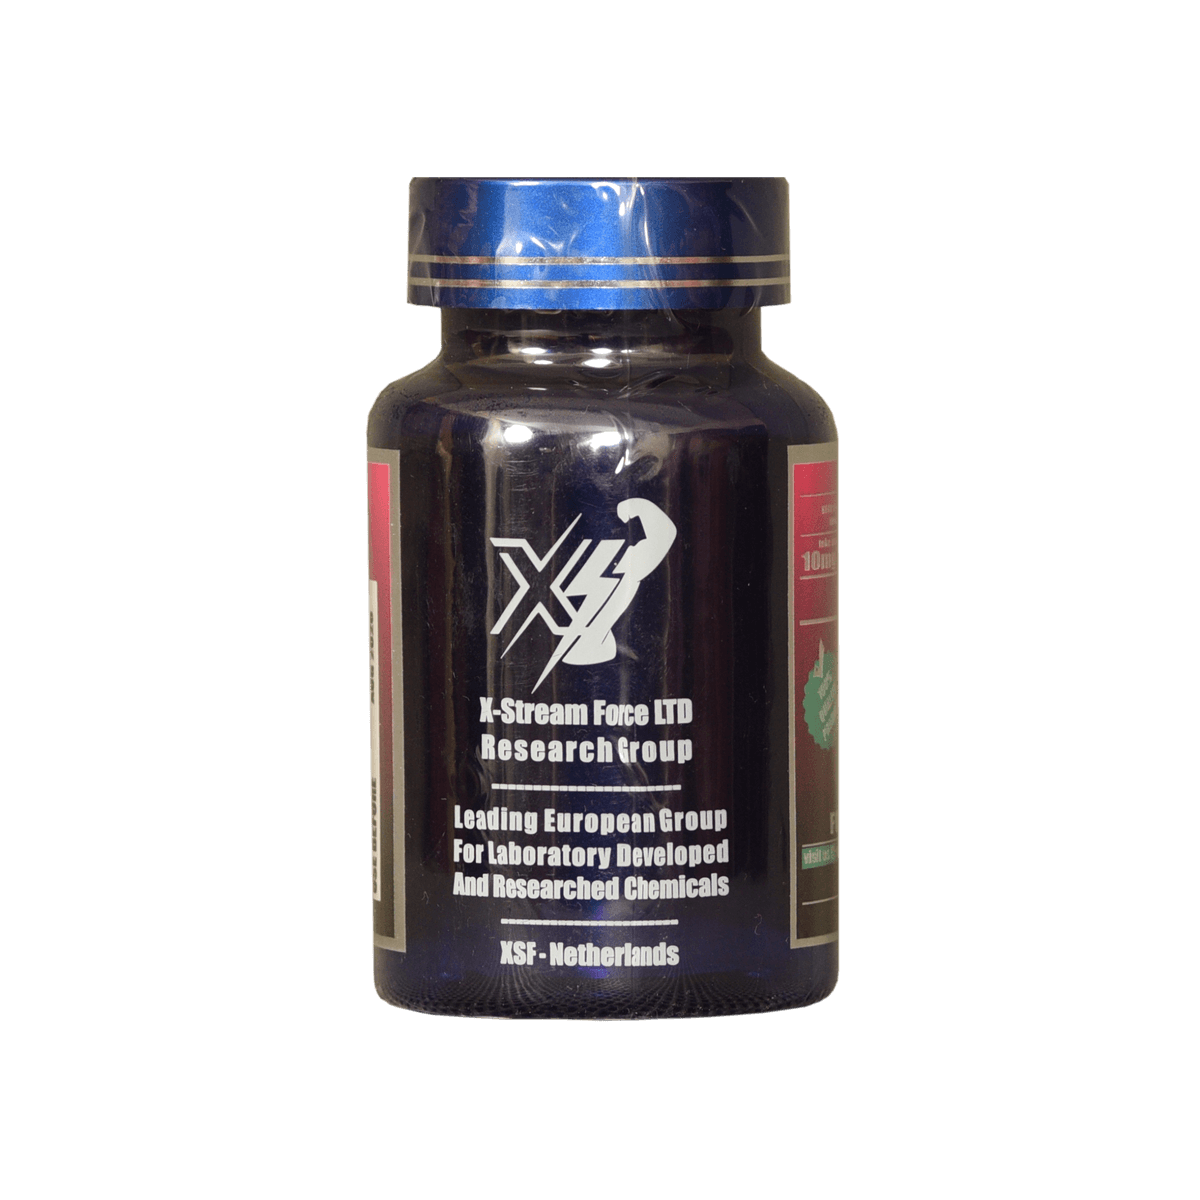 ostarine-mk2866-capsules-90-10mg-muscle shop-xstreamforce-for ladies-mass-strength-volume-hard and dry-healthy bones-buy online✦mk2866 sarms✦ fitness supplements-muscle-hunter